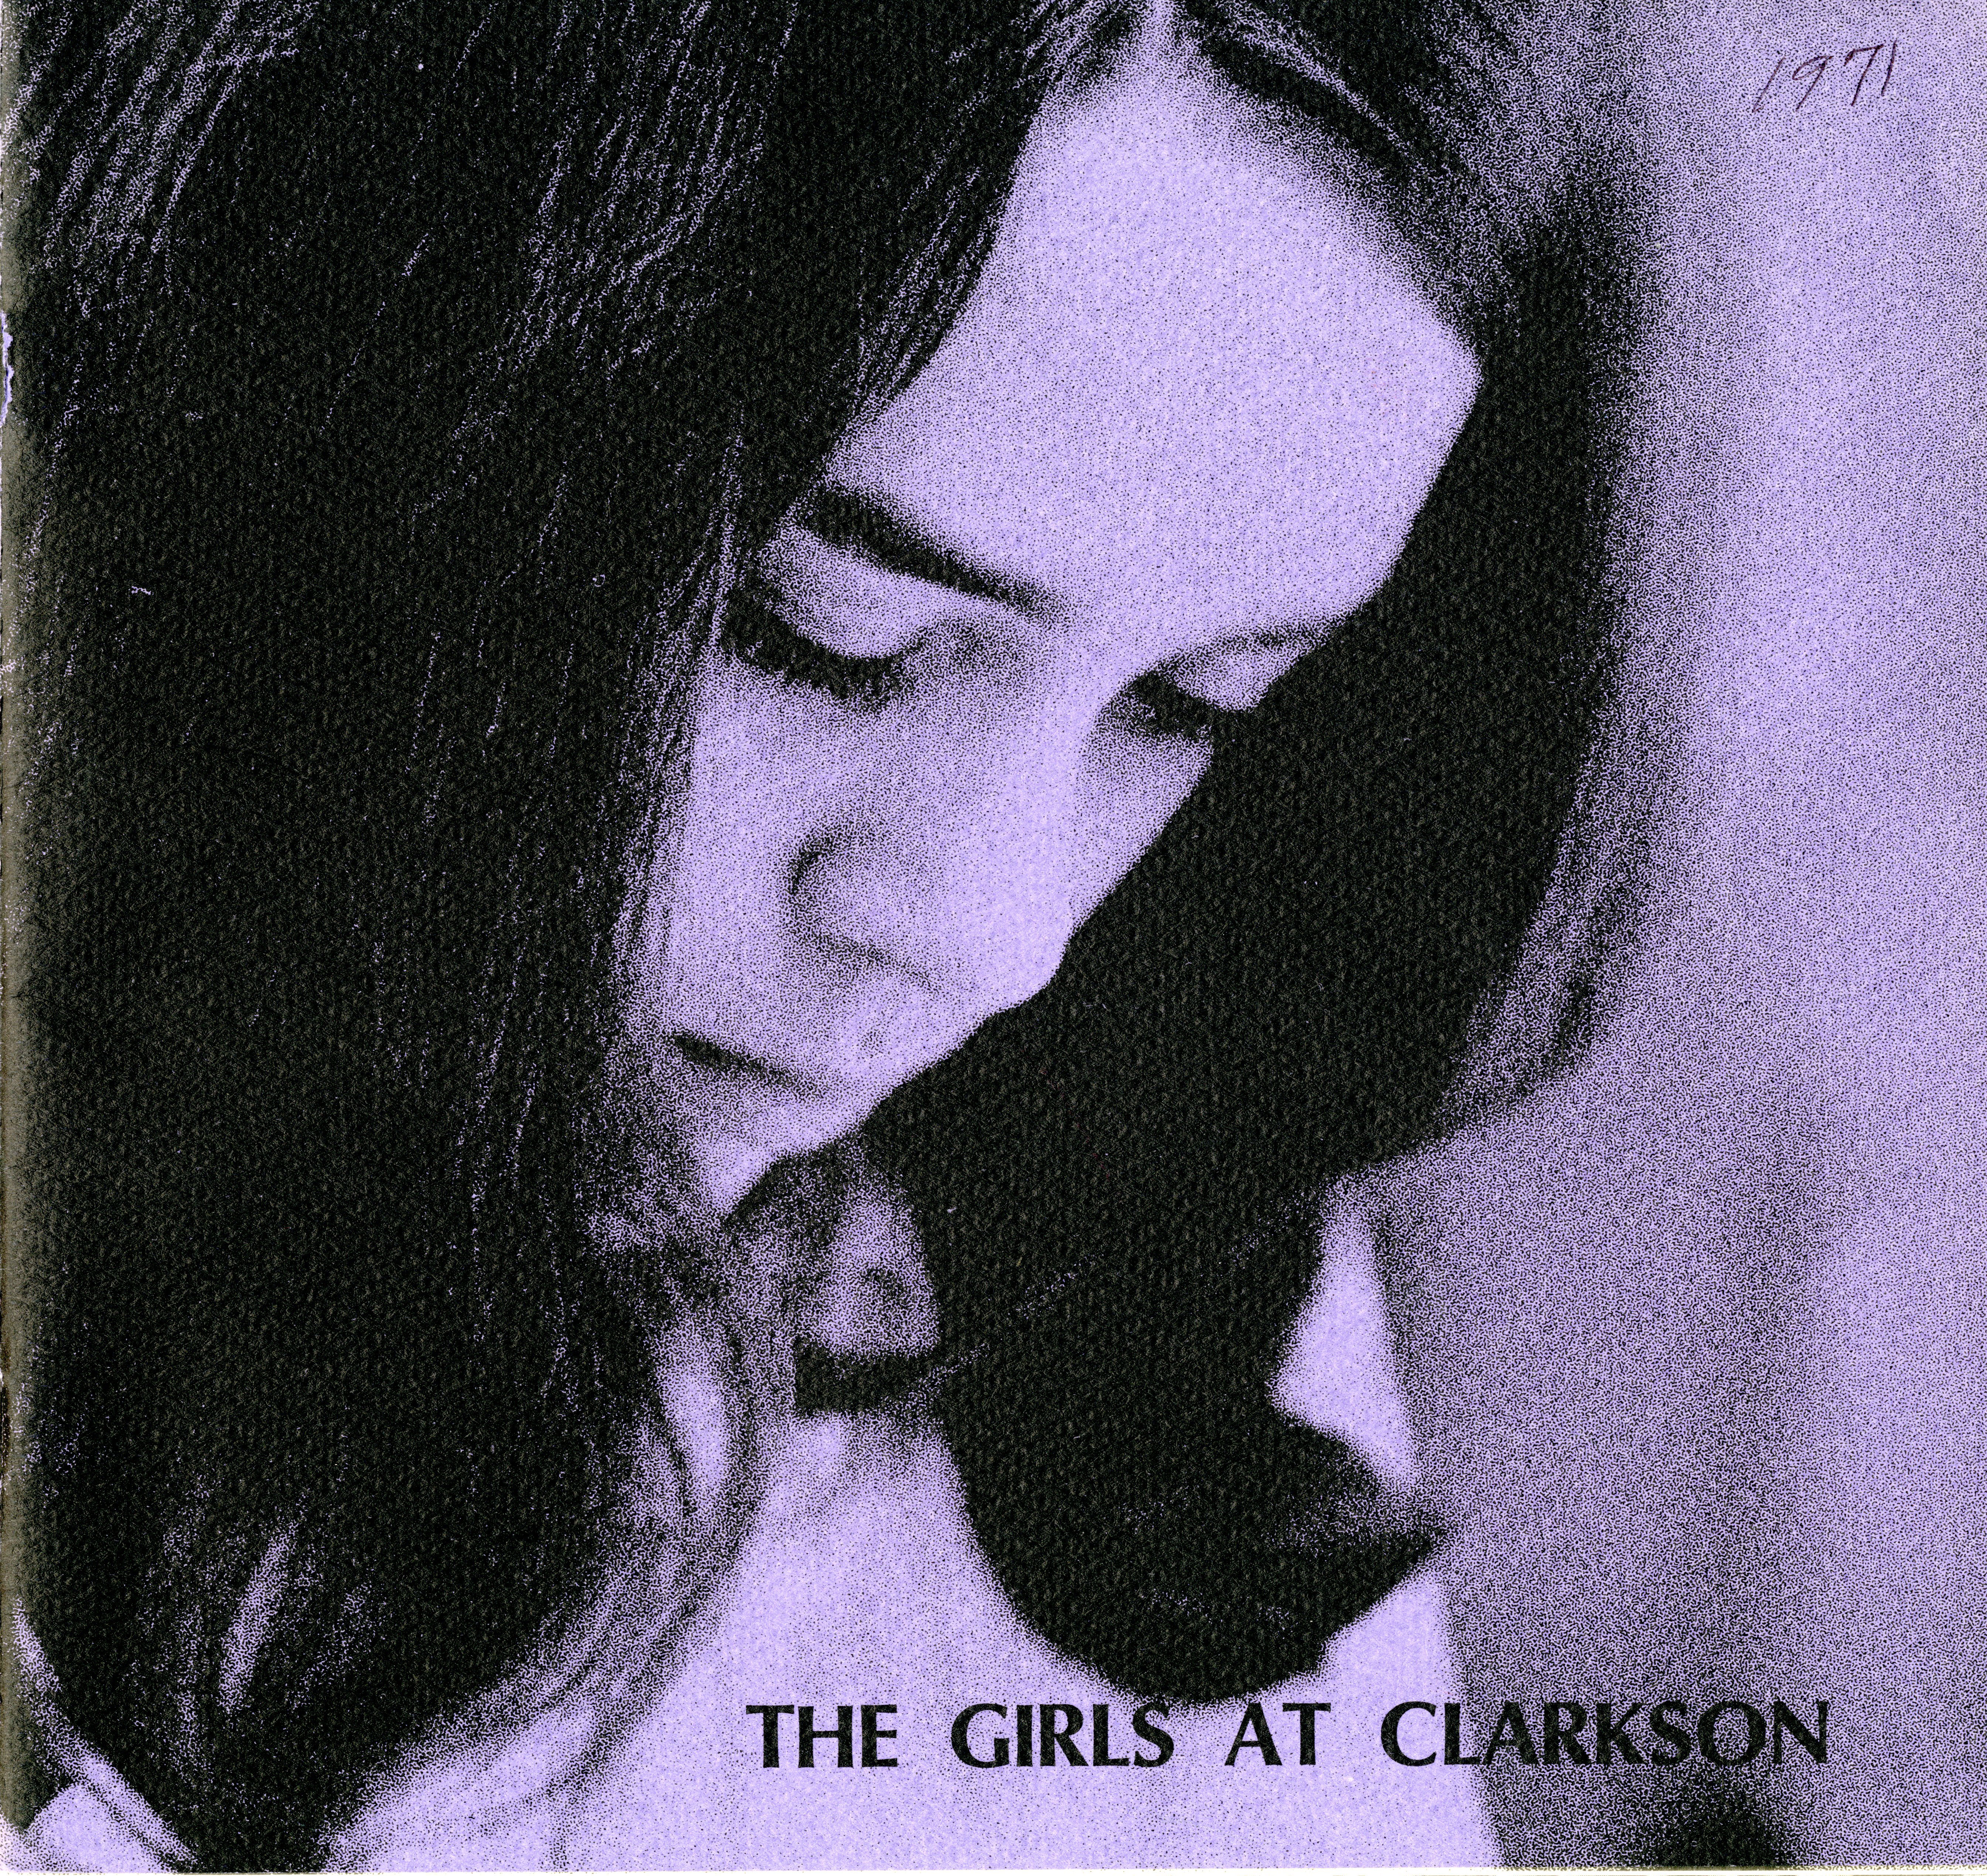 Cover of <i>The Girls at Clarkson,</i> a 1971 promotional pamphlet